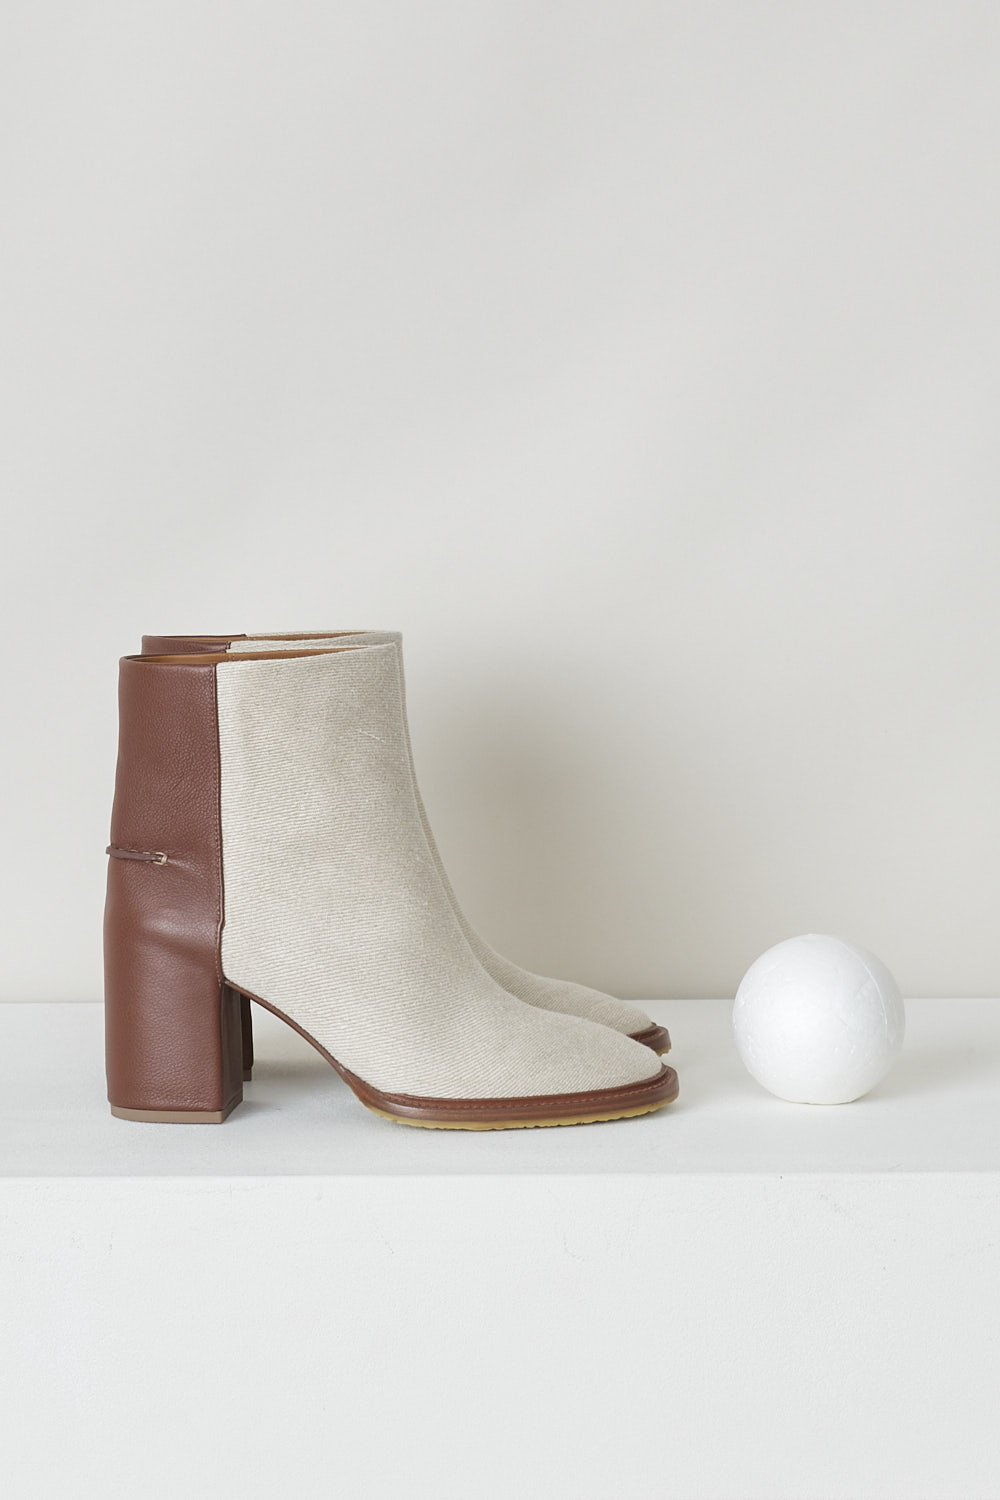 CHLOÃ‰, BEIGE EDITH ANKLE BOOT WITH BROWN HEEL, CHC22S521W89C, Beige, Brown, Side, These beige slip-on ankle boots have a brown leather-clad block heel with white stitching on the ankle. The boots have a round toe and a contrasting brown sole. 
